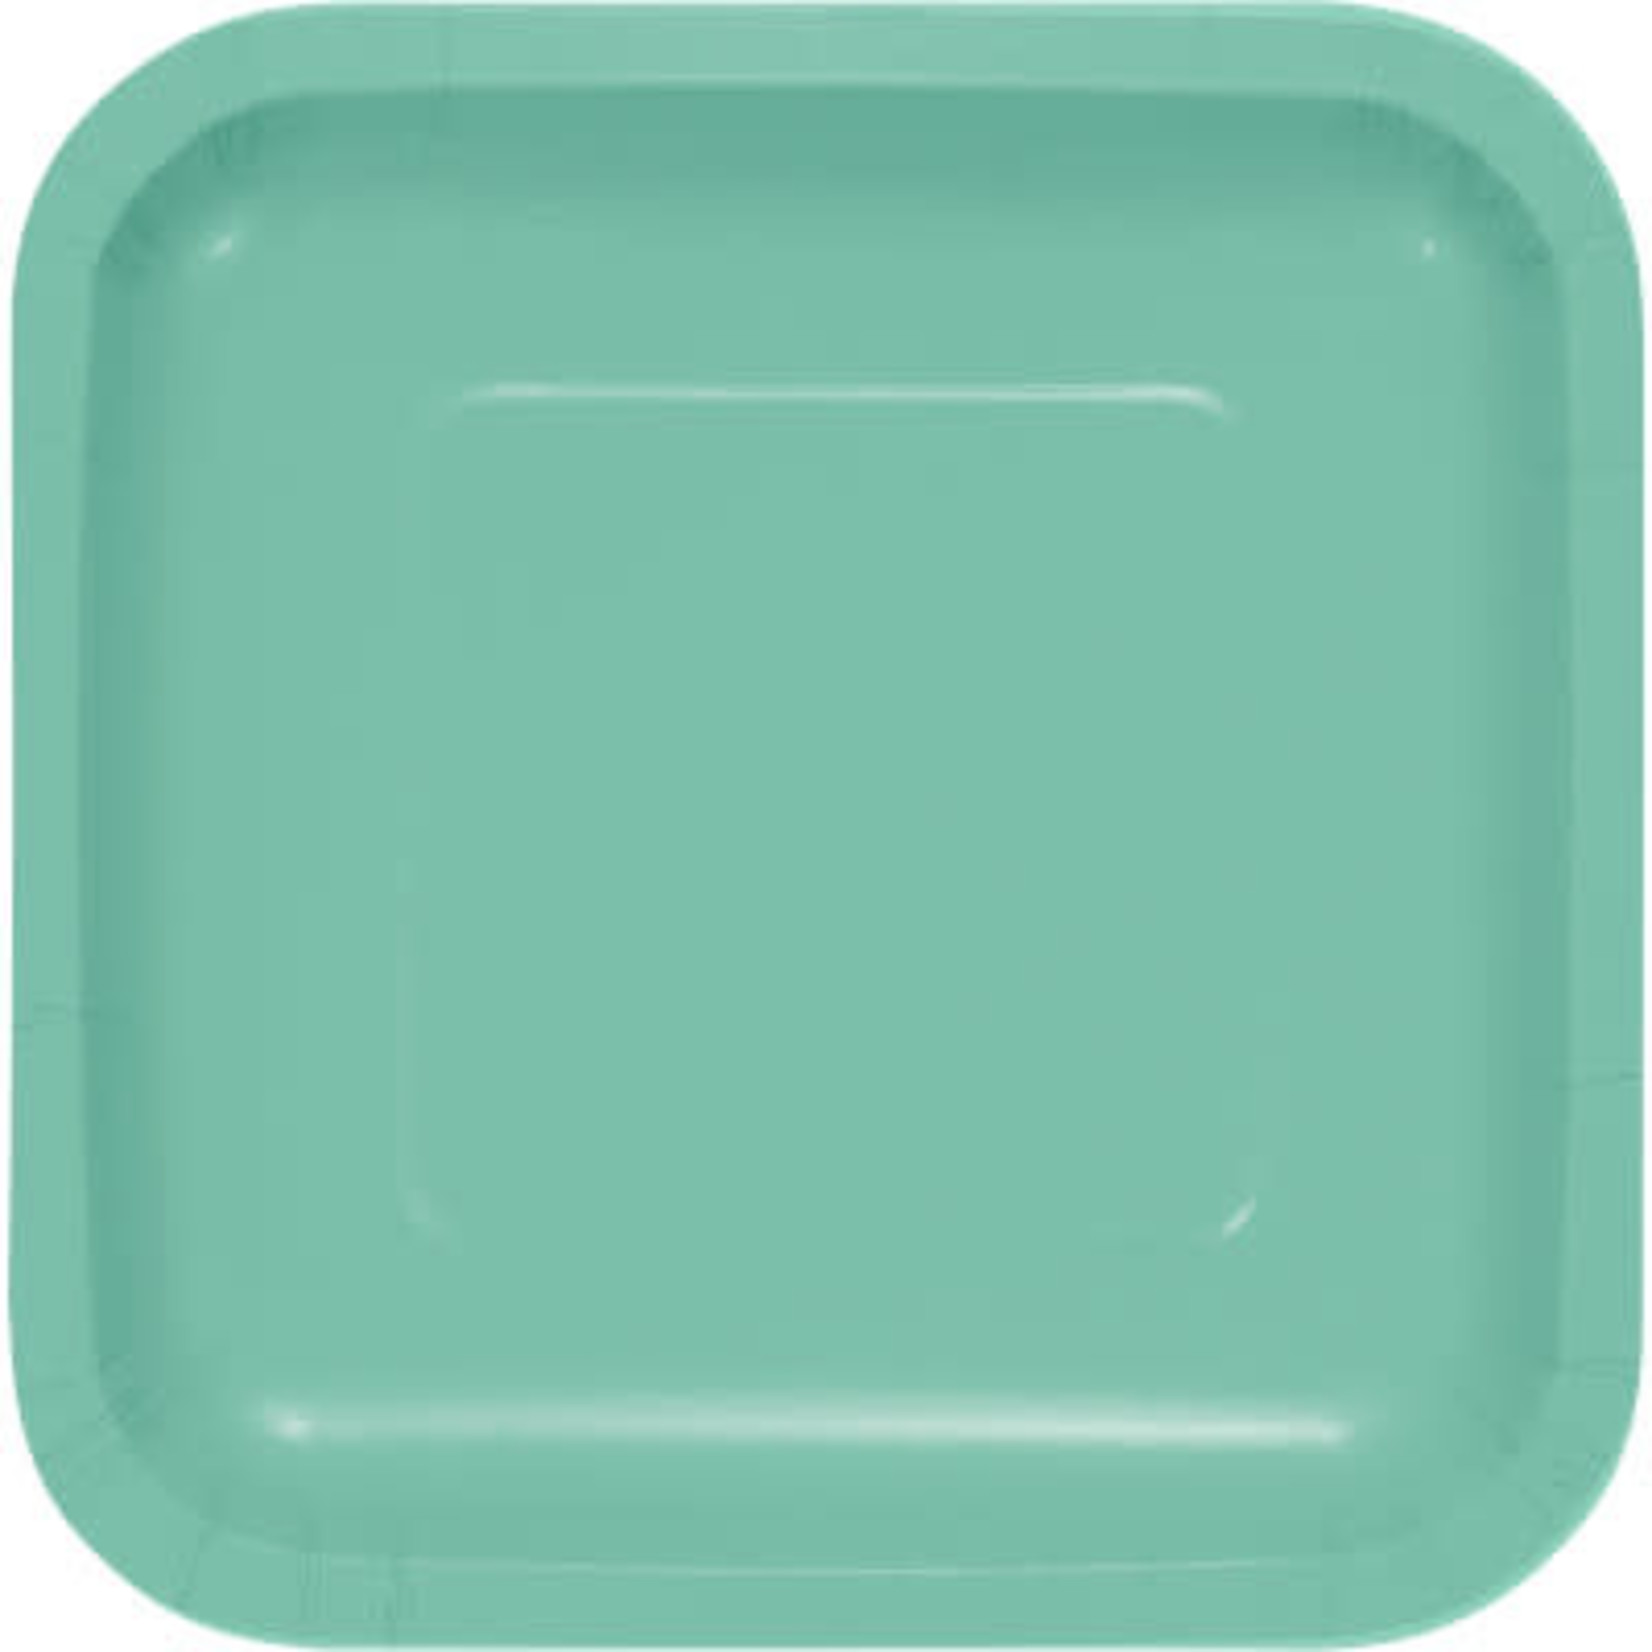 Touch of Color 7" Mint Green Square Paper Plates - 18ct.